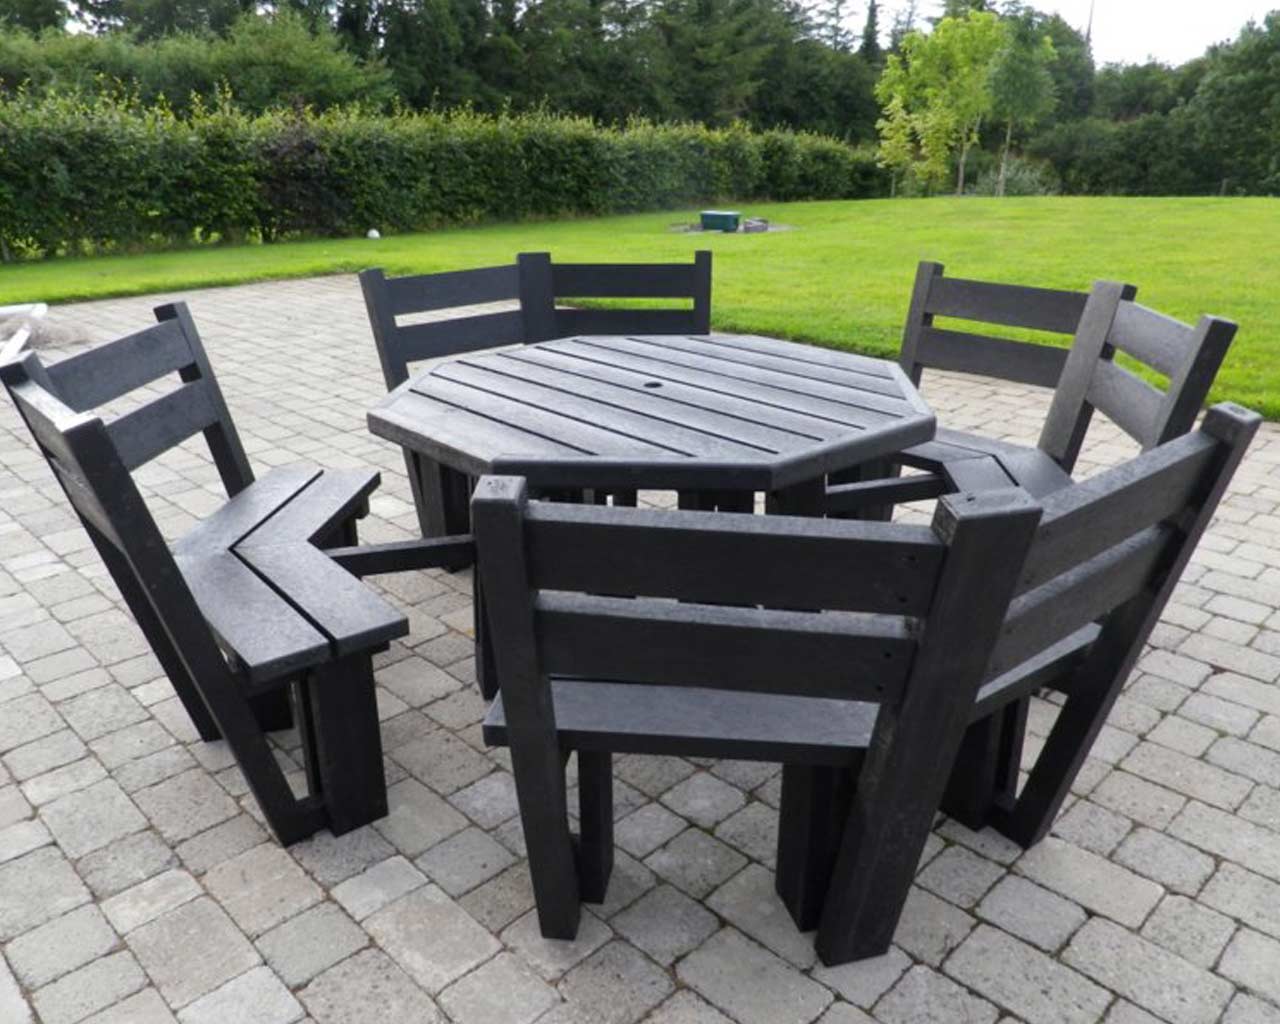 8 seater picnic table with back